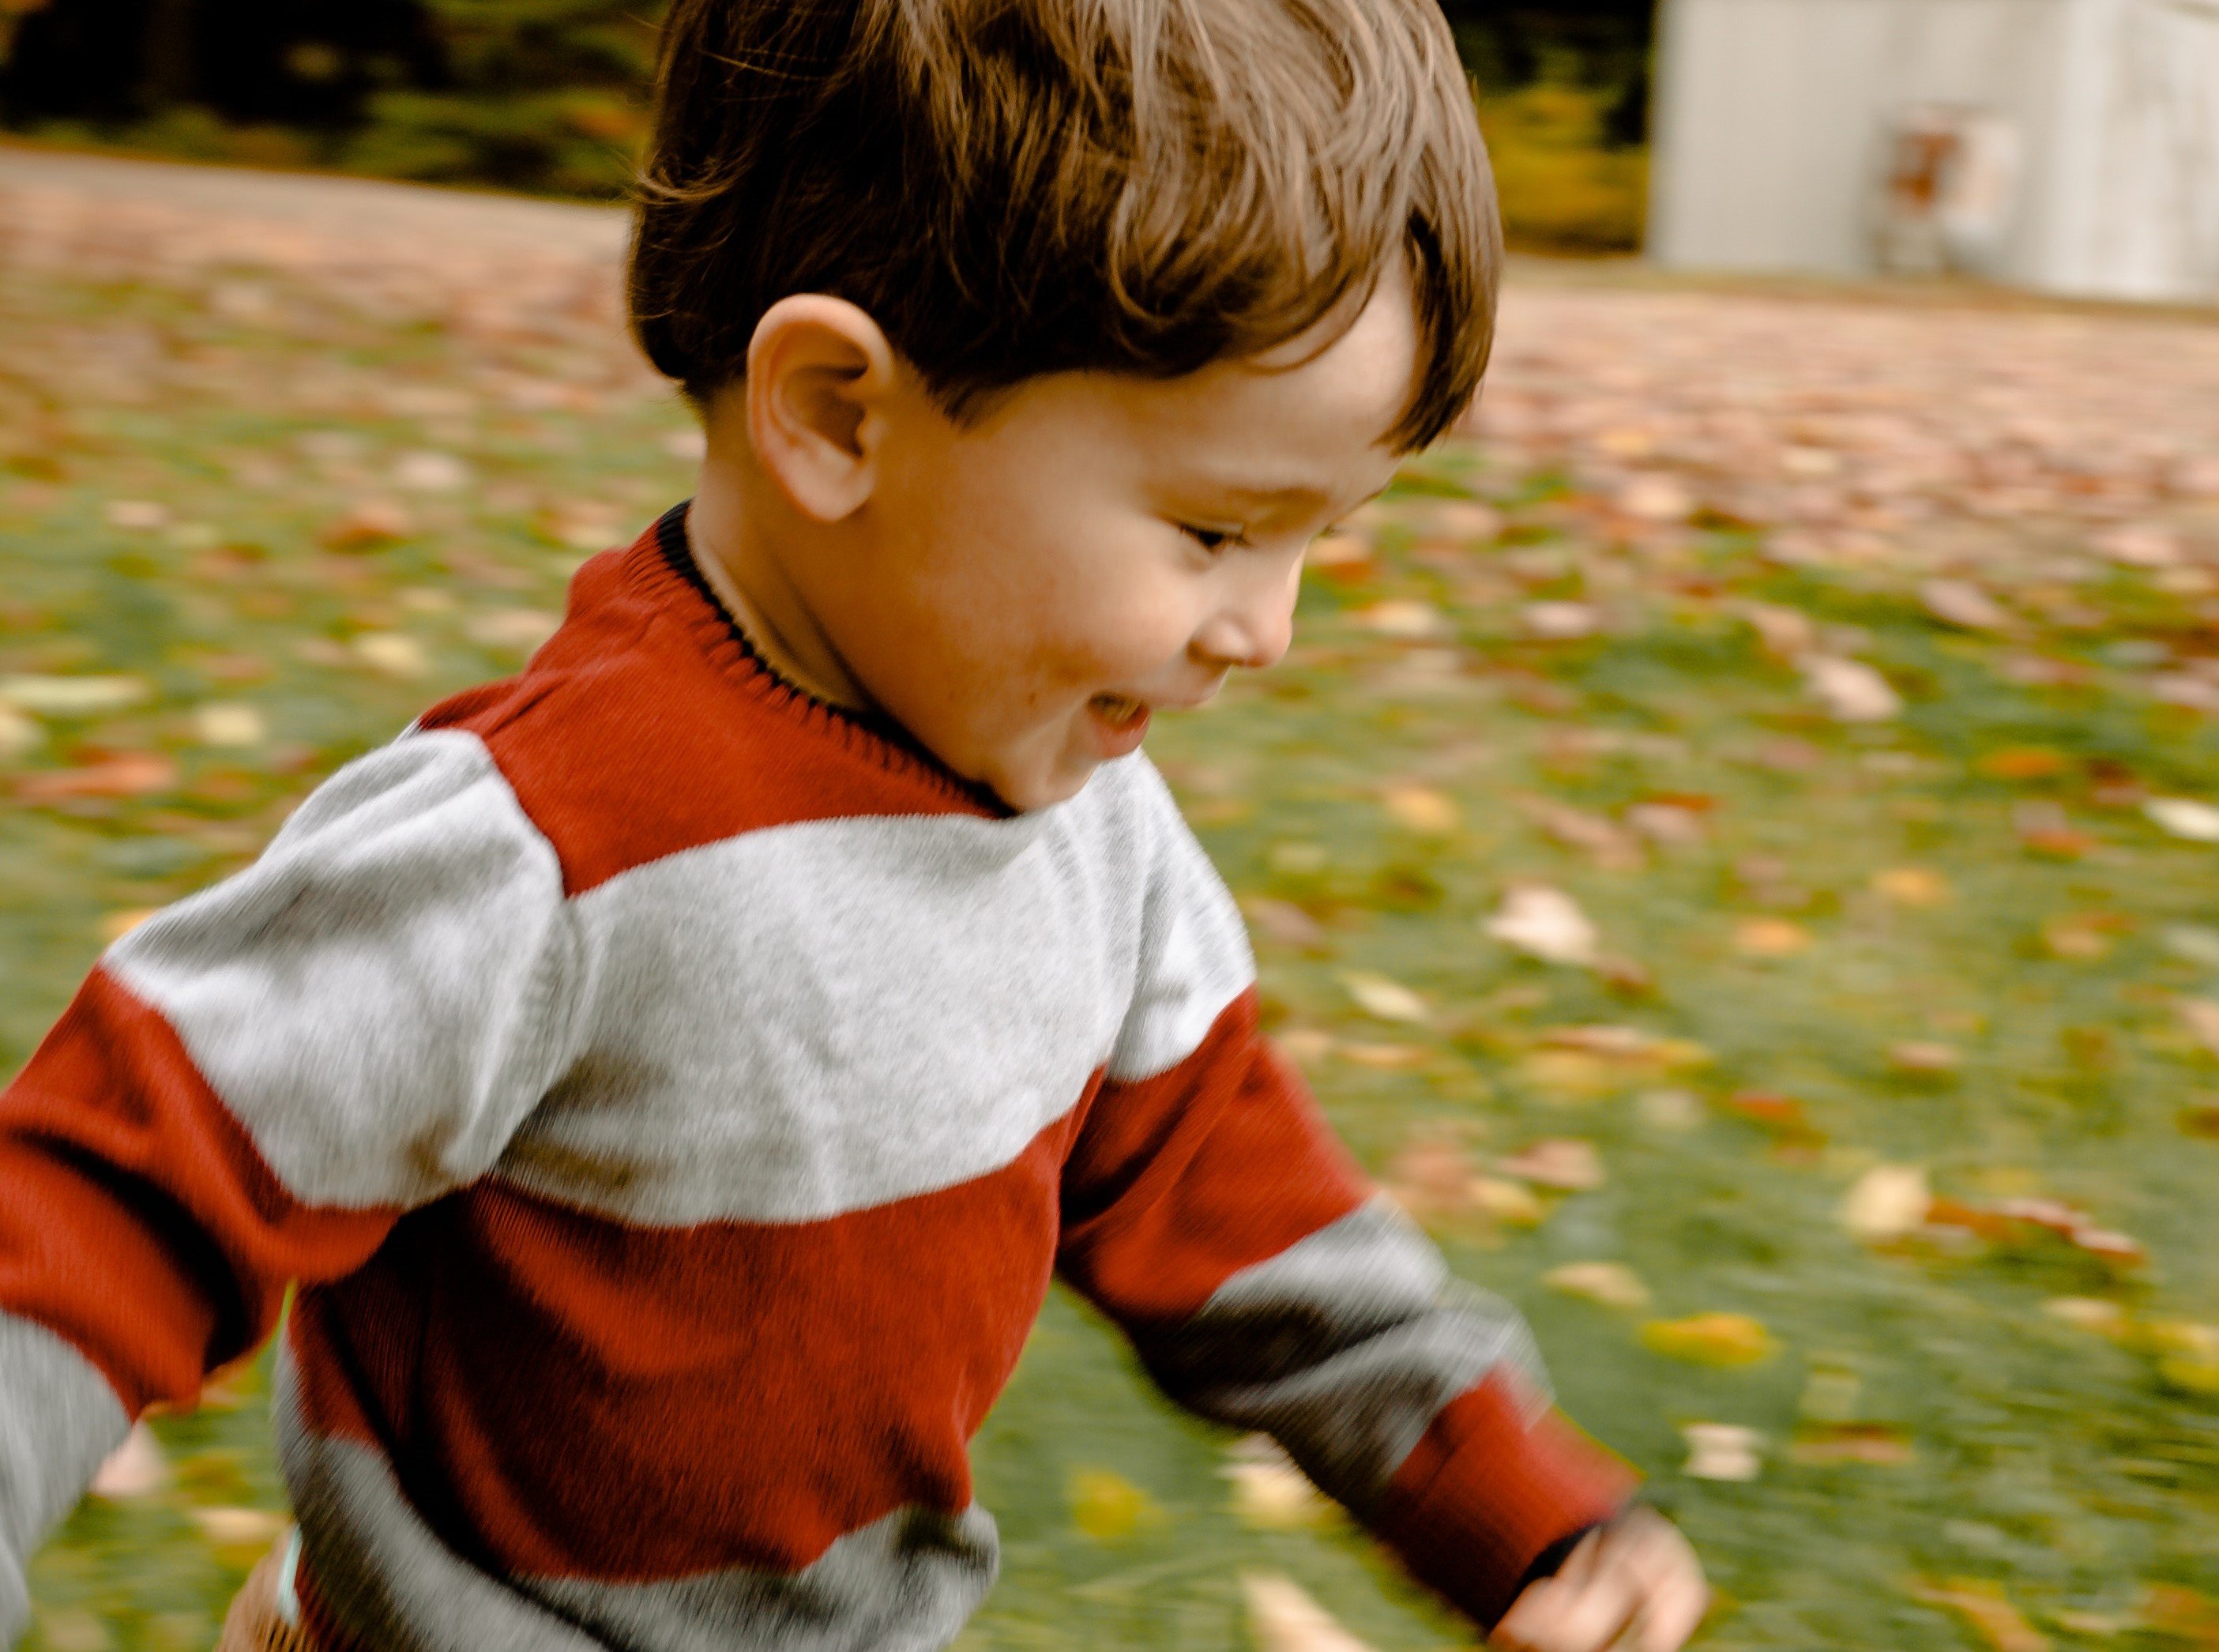 A happy little boy playing outside | Source: Pexels